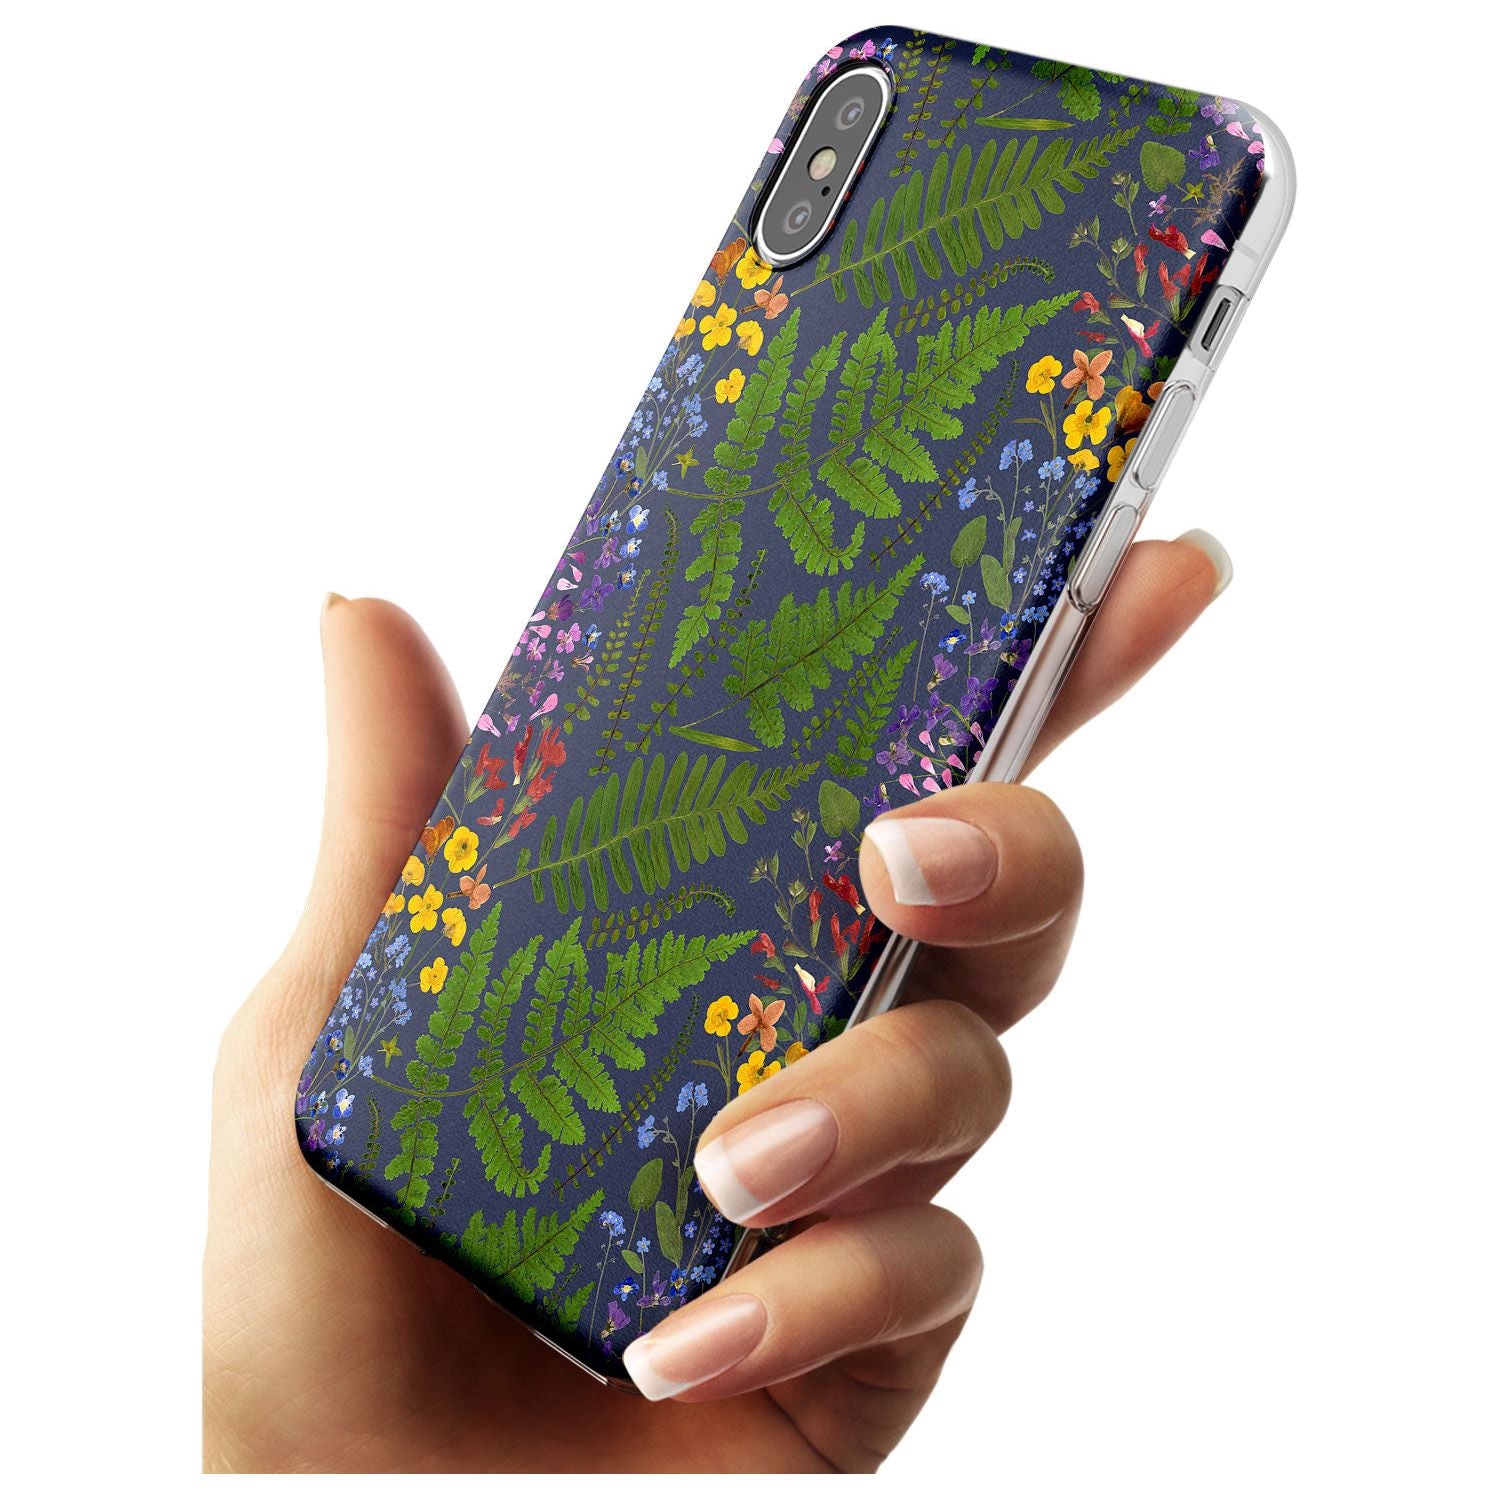 Busy Floral and Fern Design - Navy Slim TPU Phone Case Warehouse X XS Max XR